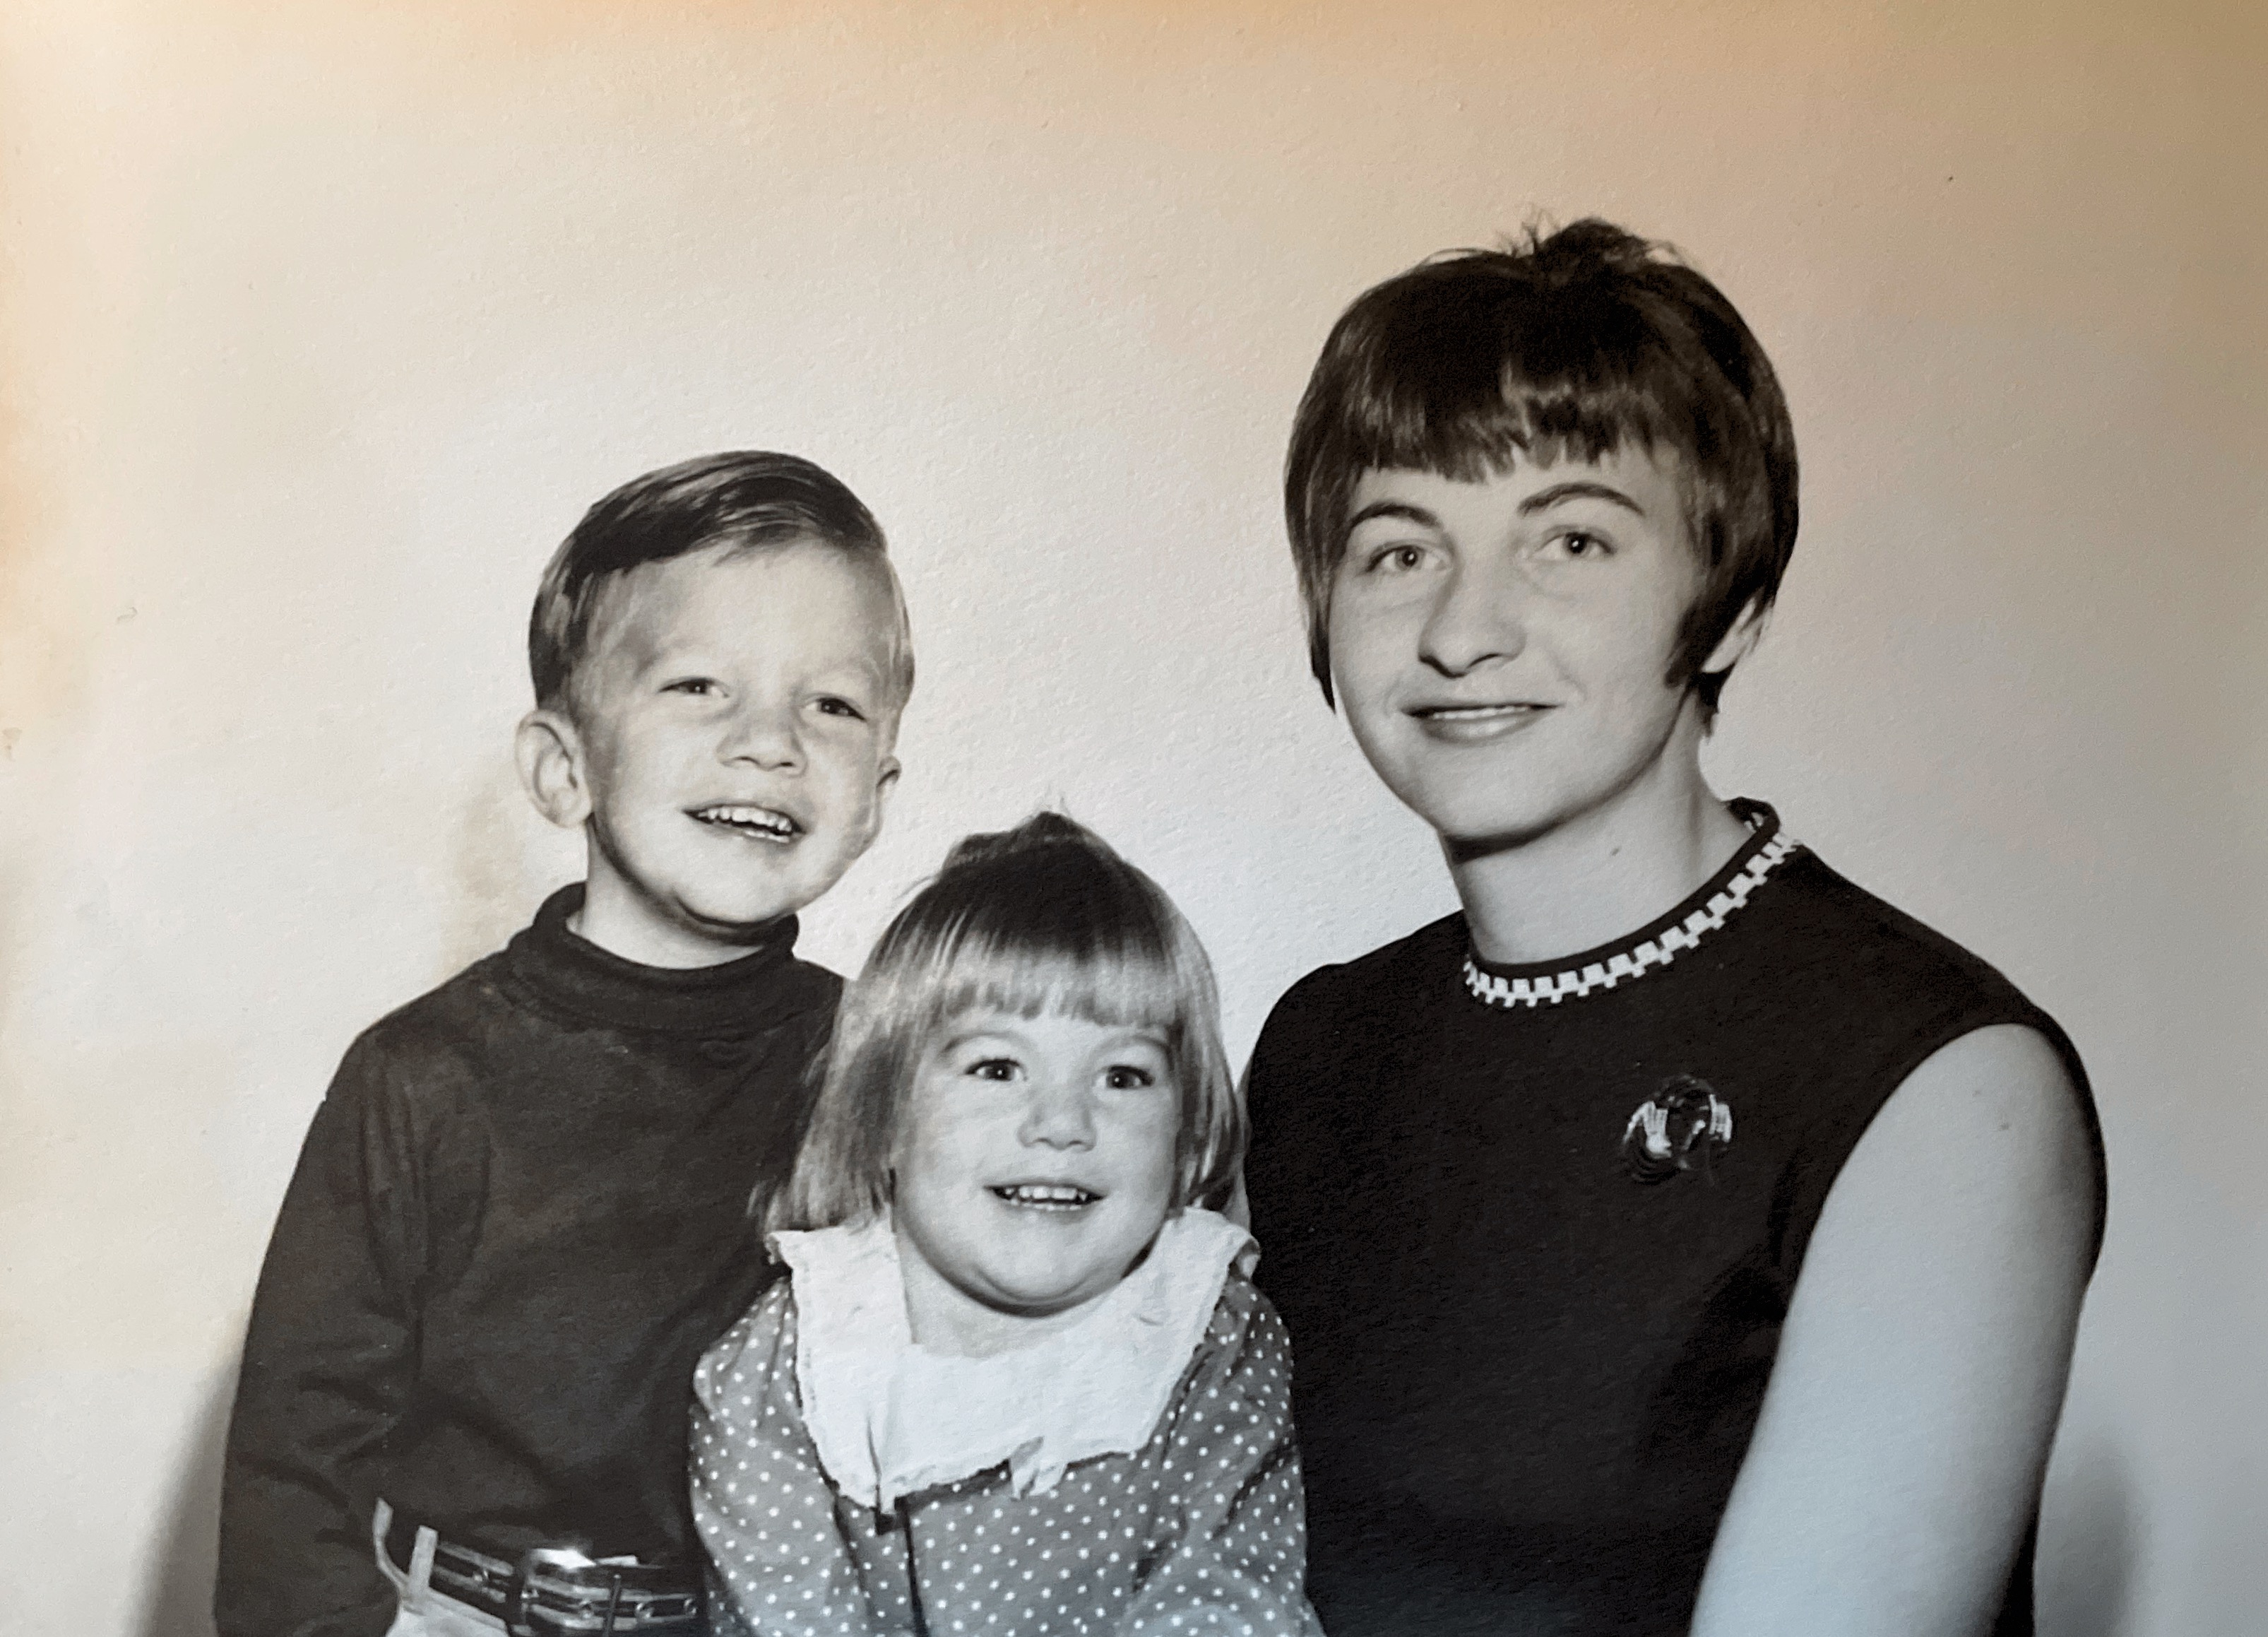 Bob, Jodi and Fayne - picture for Roger about 1969